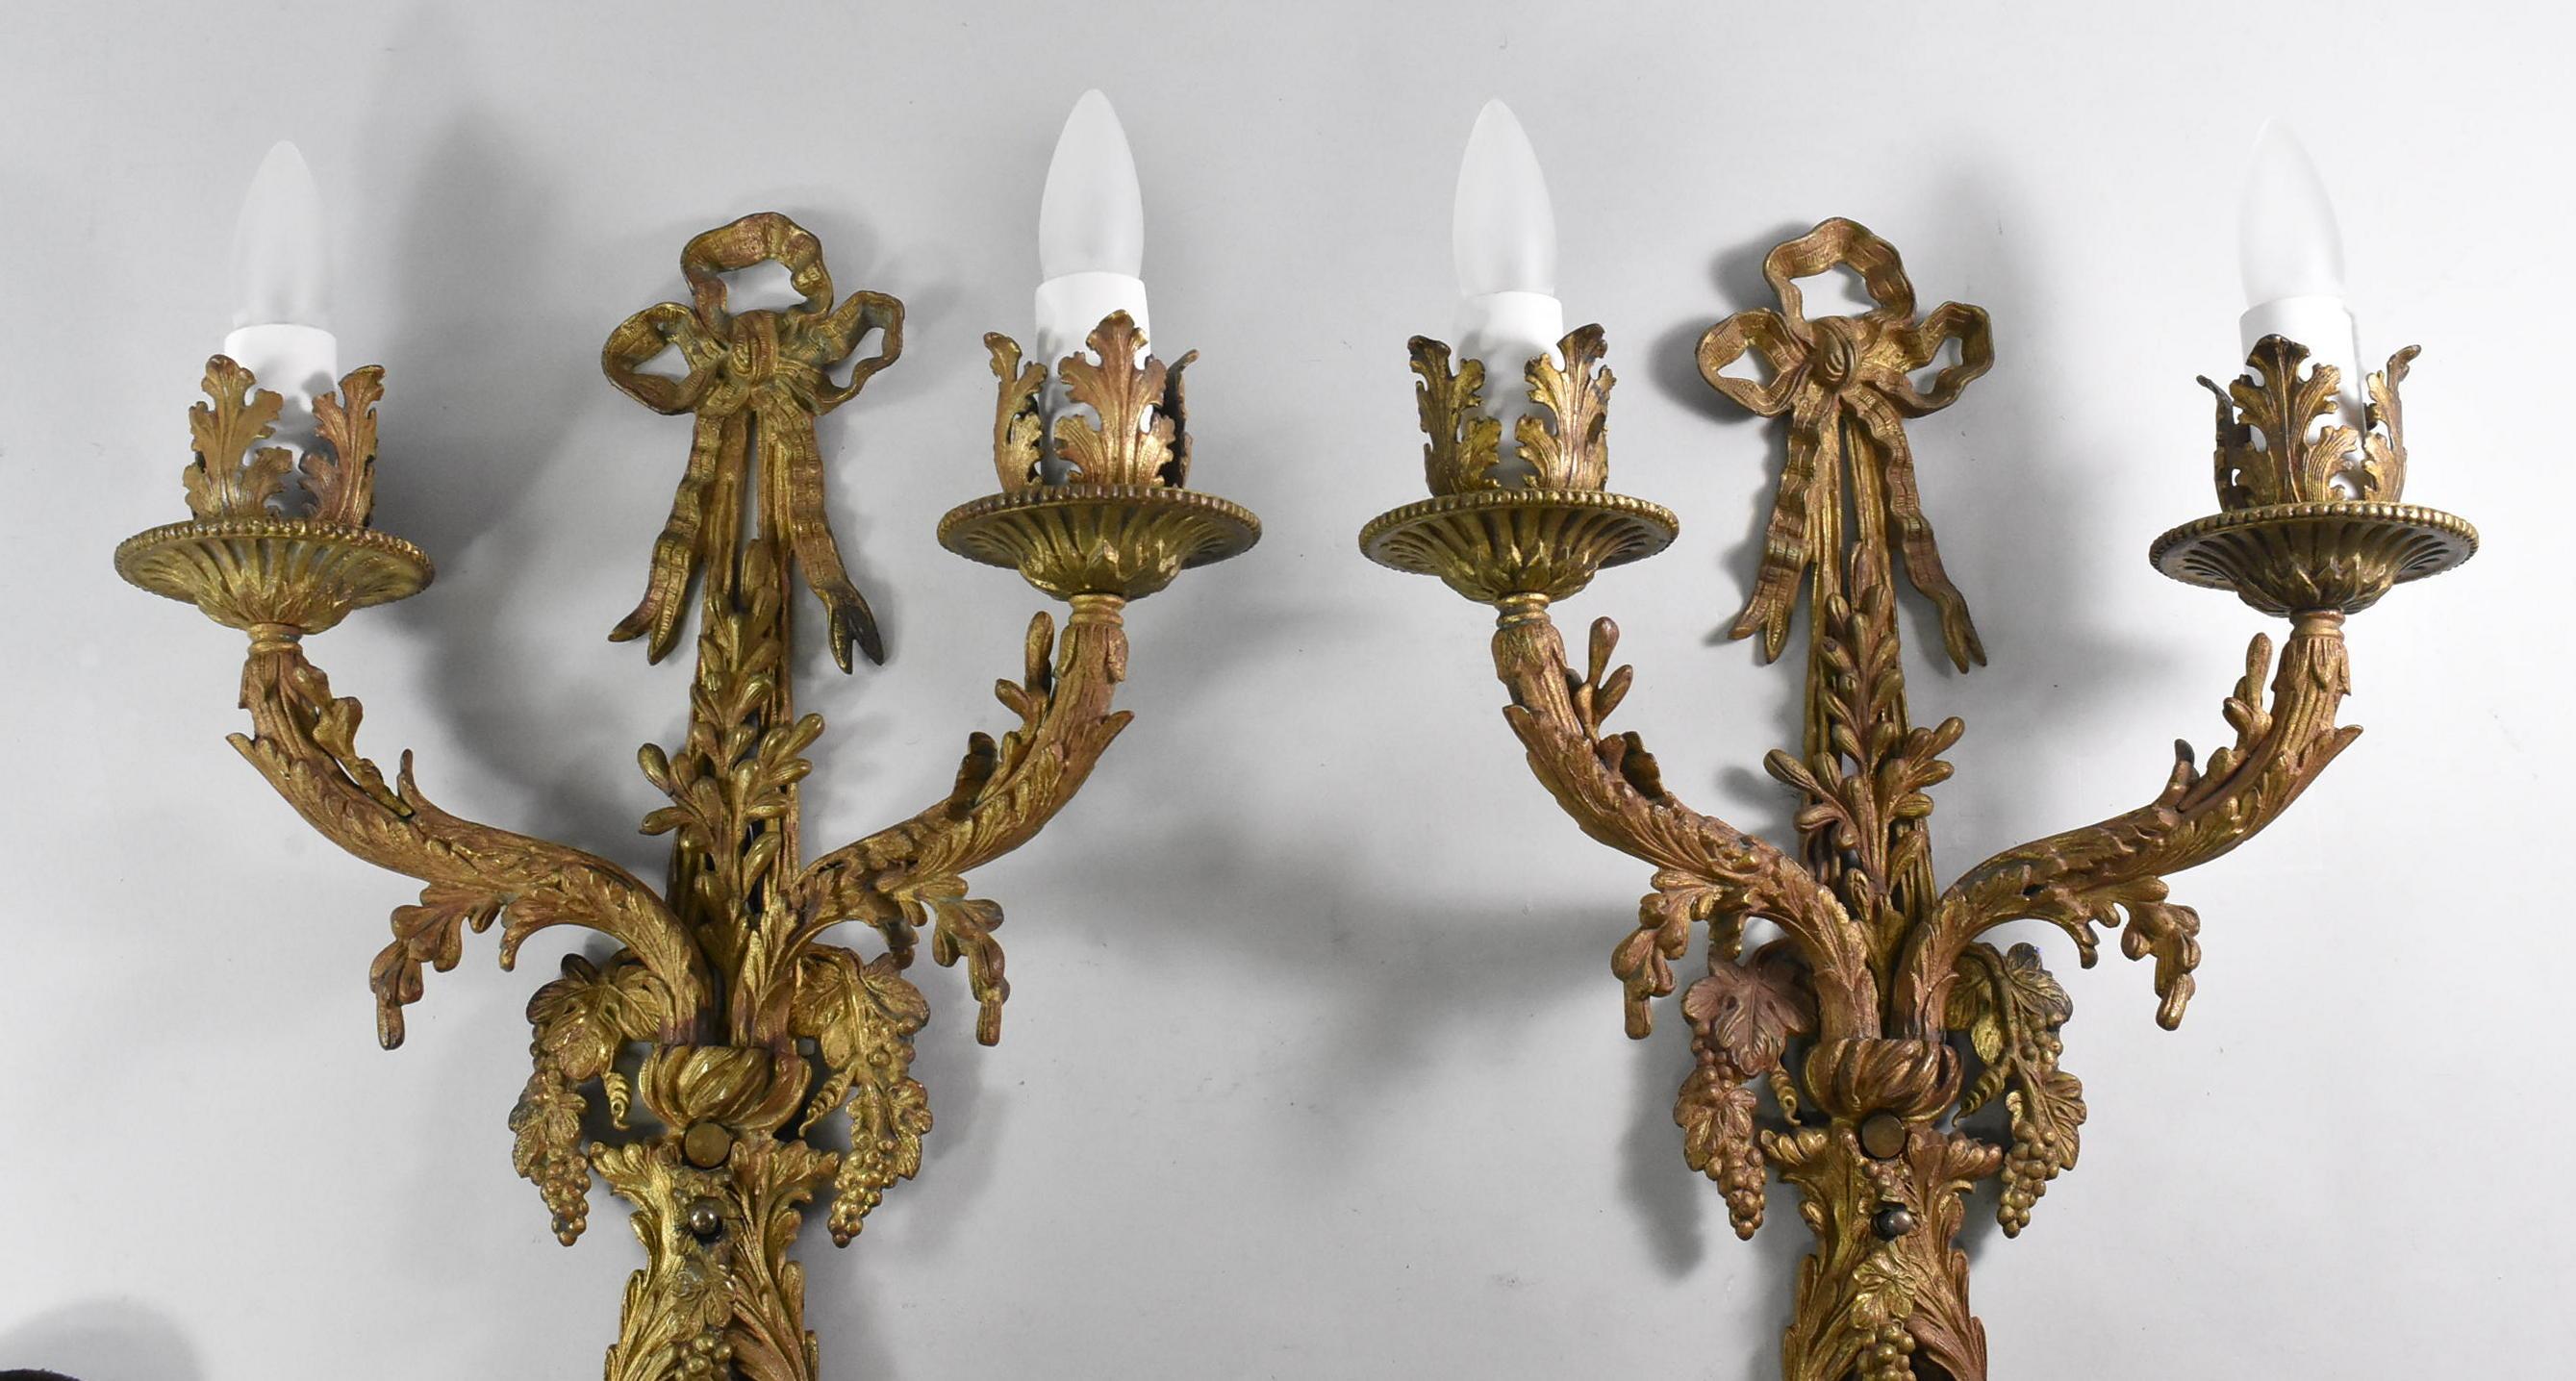 Pair of French style bronze two socket wall sconces. Ribbon bow top detail. Body has grape cluster with leaf designs. Acanthus leaf candleholder. Gold with variegated red patina. On off switch.